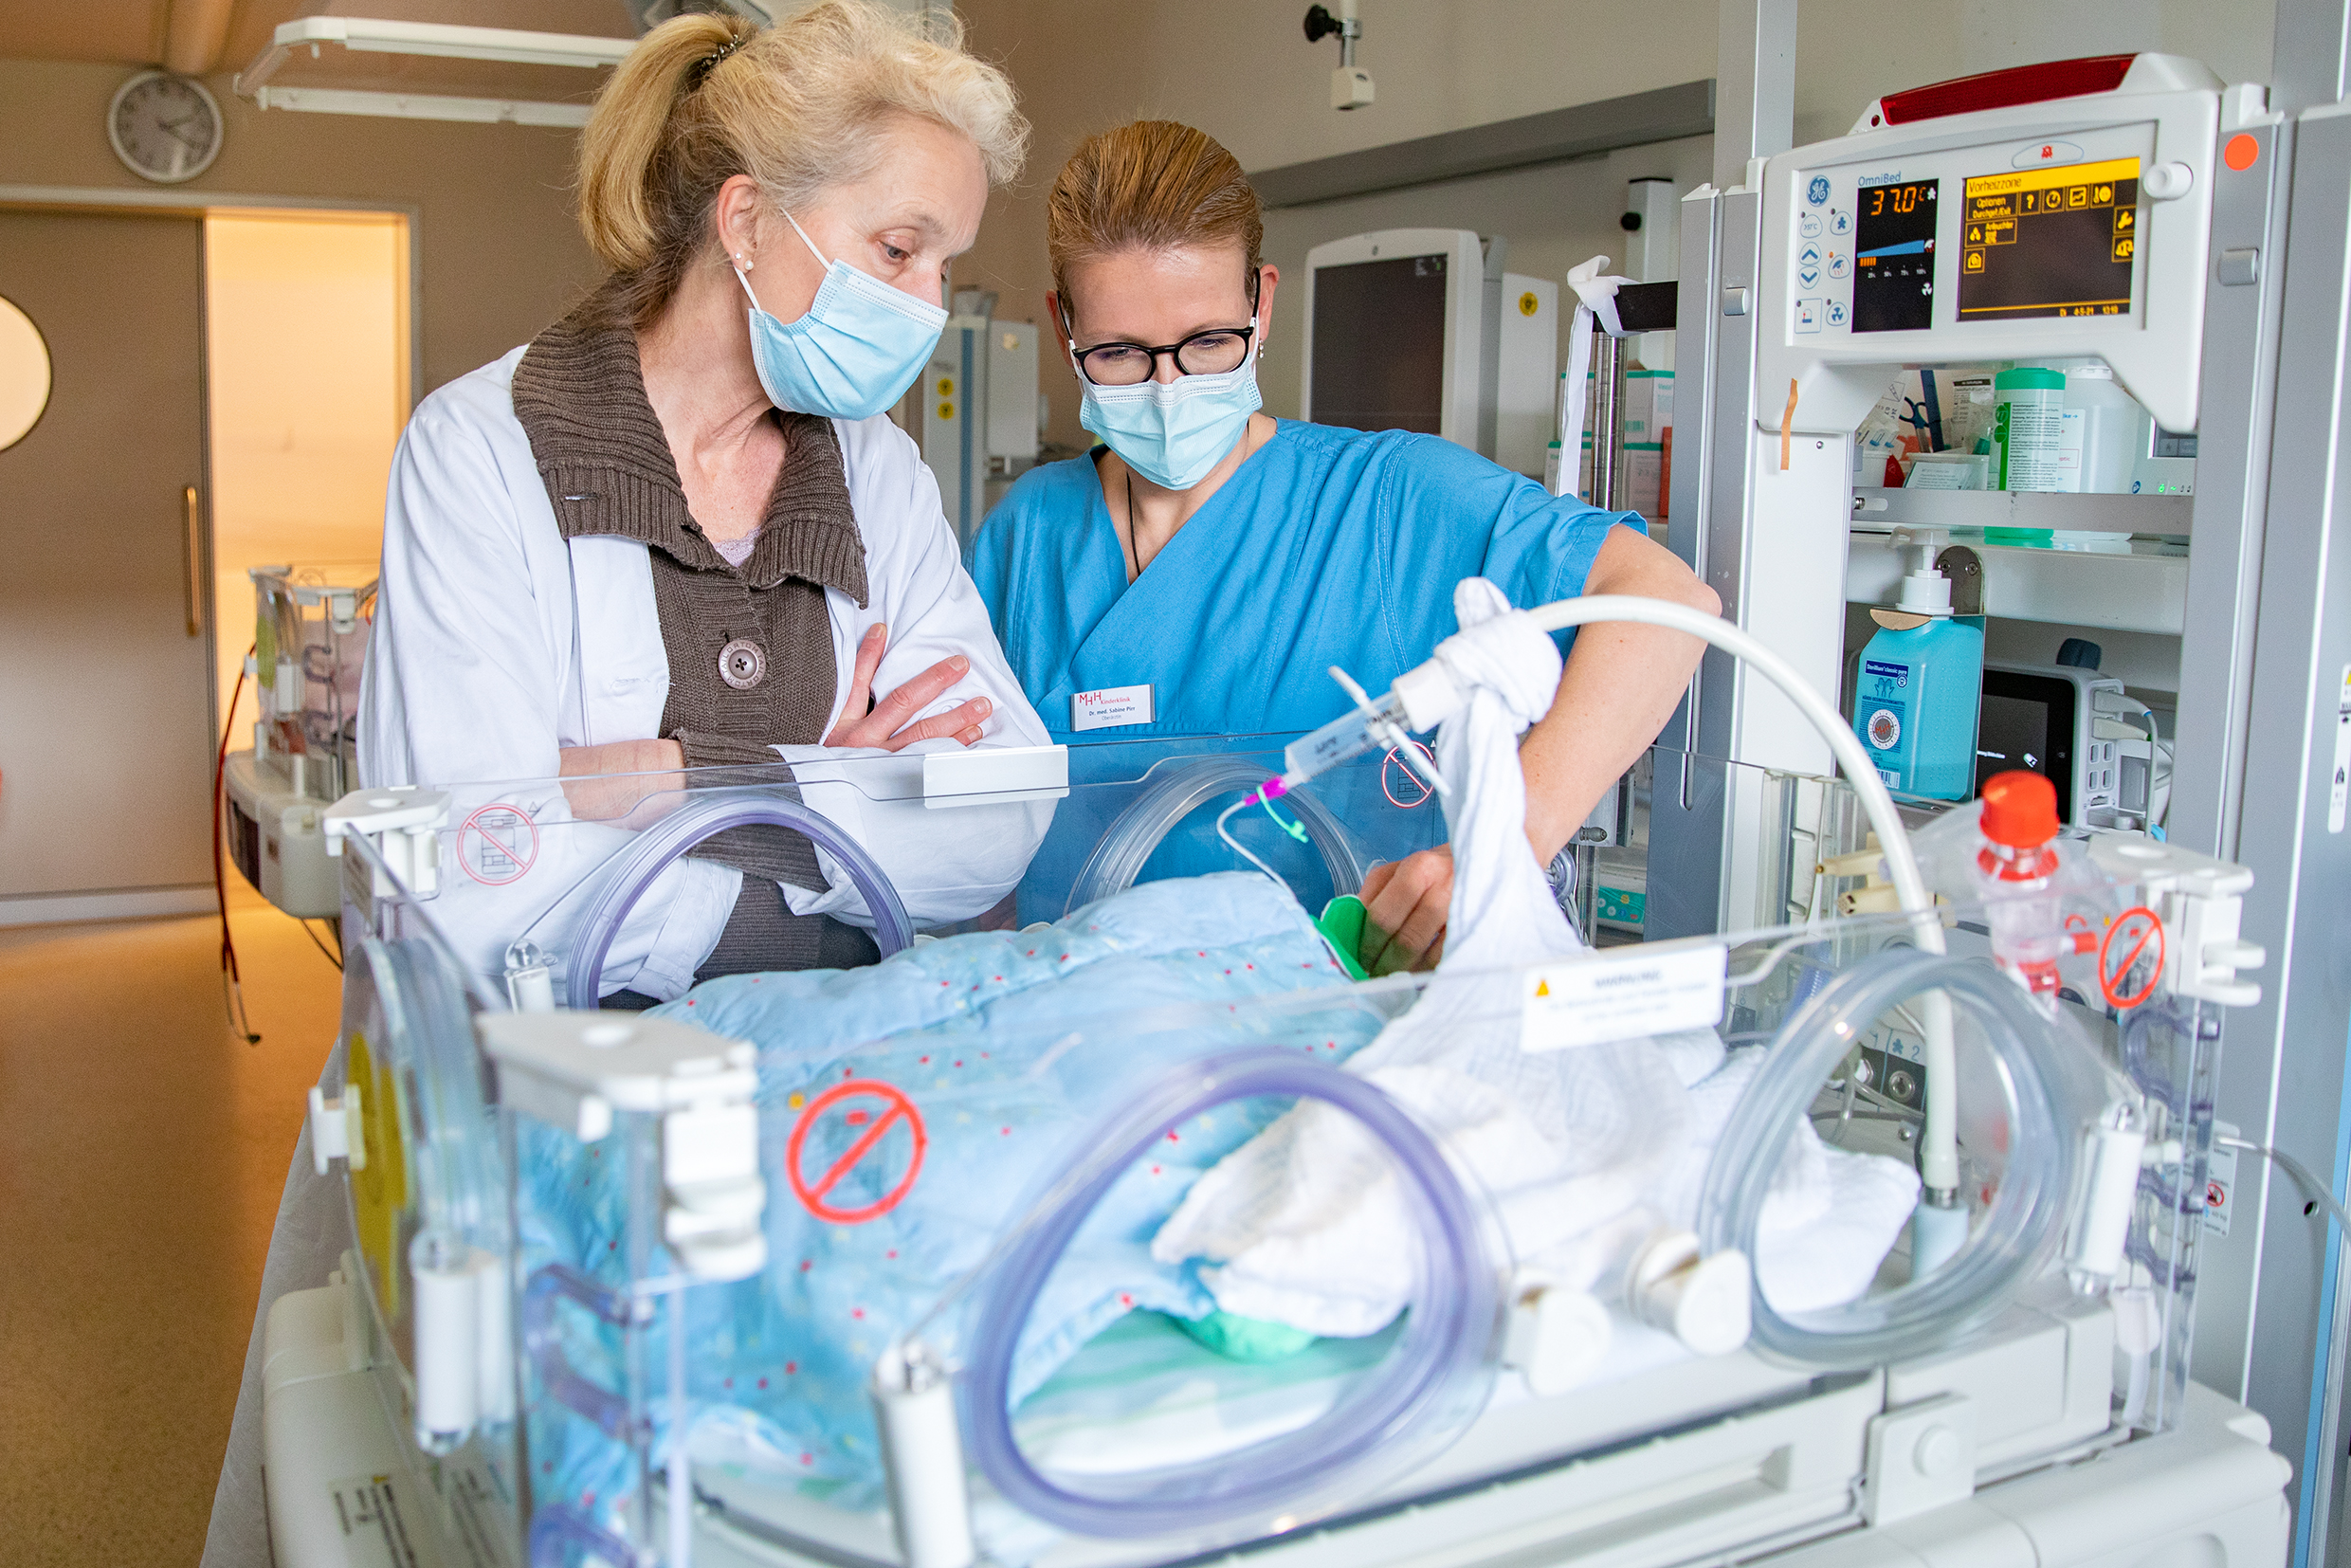 Professor Viemann and PD Dr Sabine Pirr. They are standing at the bedside of a premature baby on the ward for newborns and premature babies at Hannover Medical School, looking in